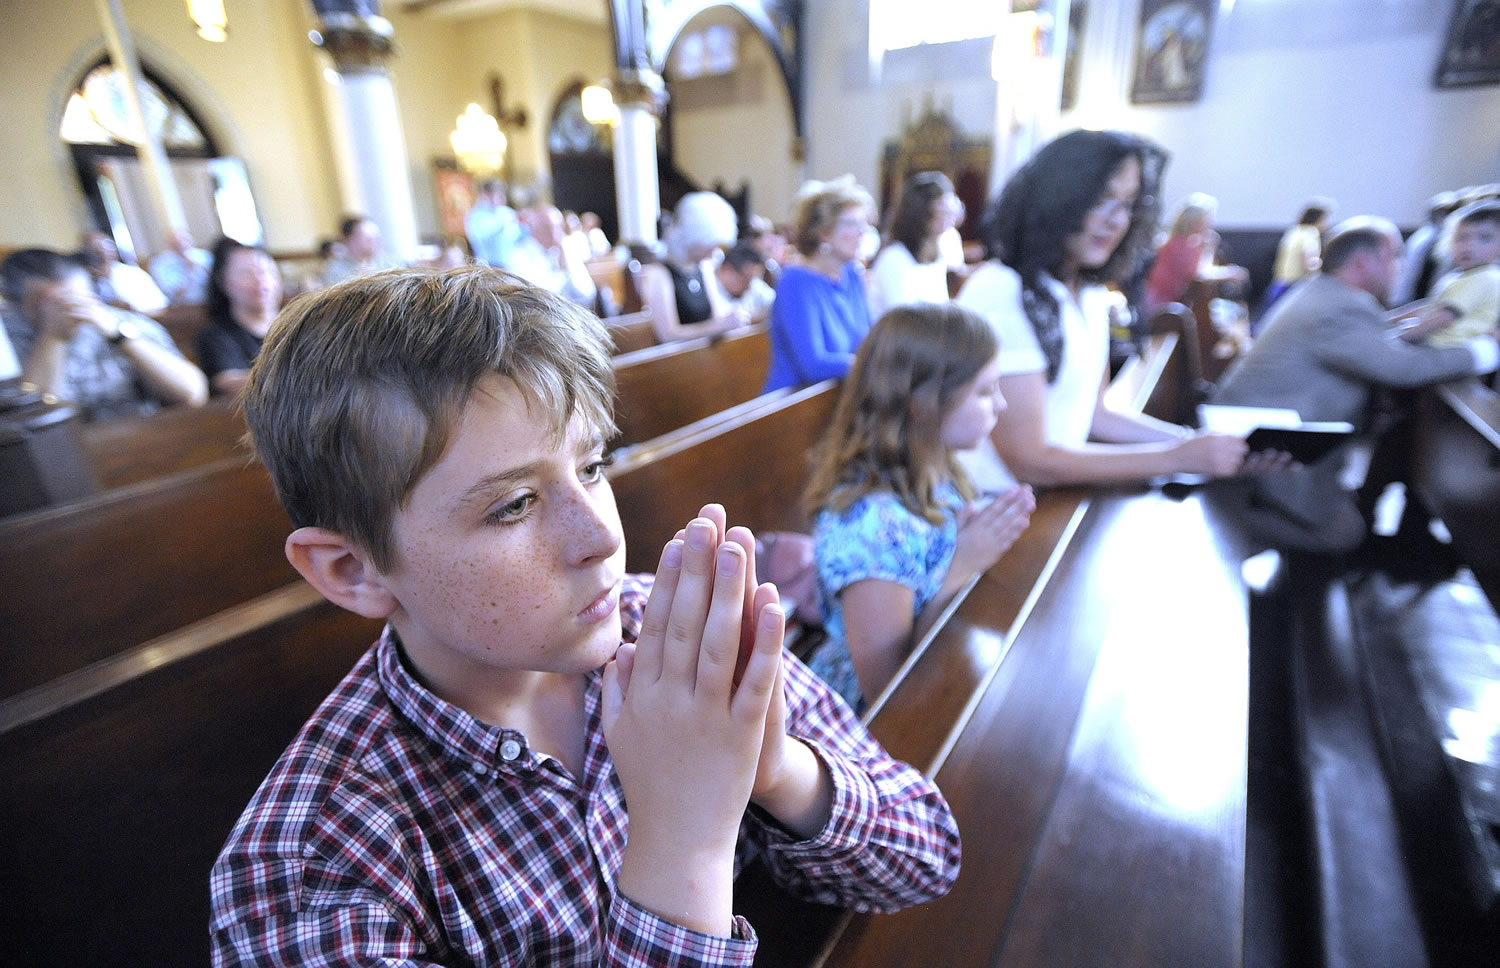 Thomas Carey, left, his sister Charlotte, center, and mother Anita, right, kneel Saturday as they pray during Mass at Saint Joseph Catholic Church in Detroit.